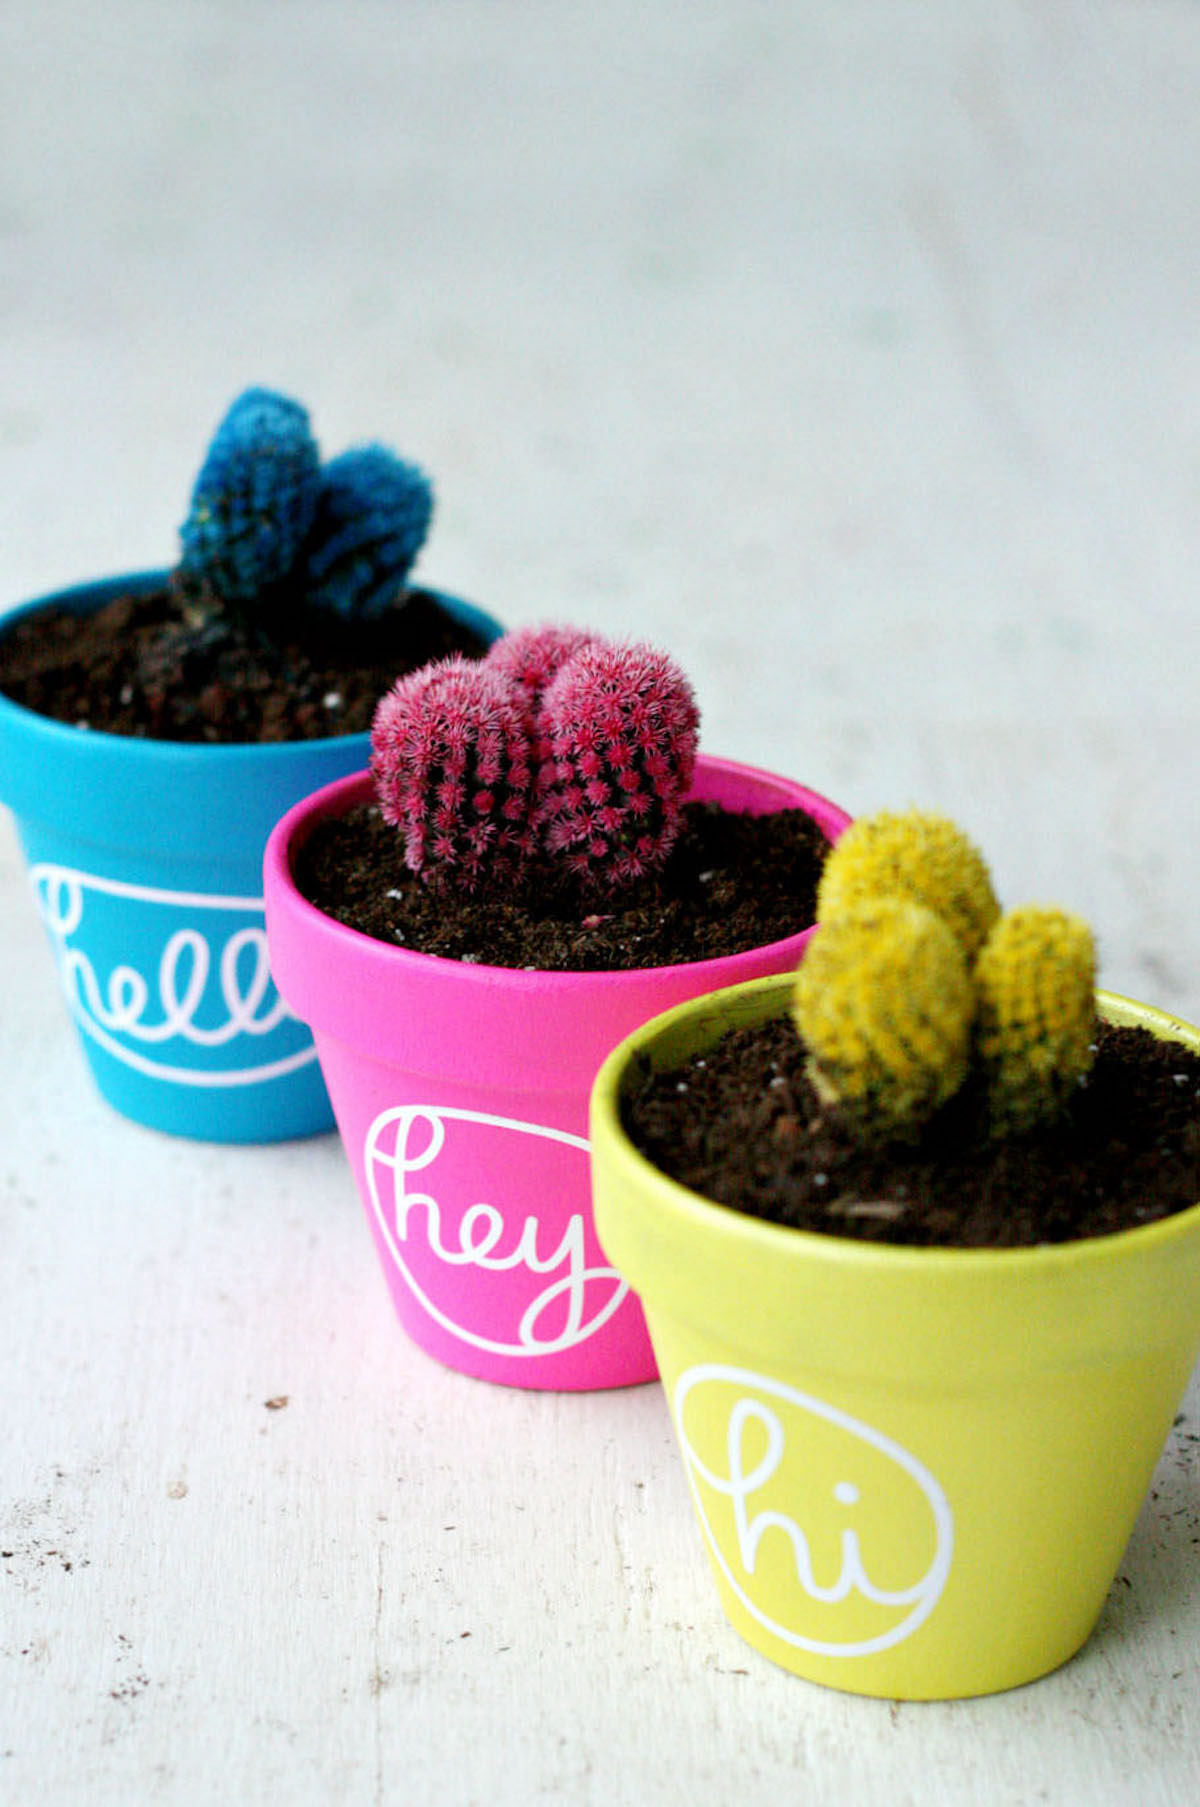 Cactus Pot Painting for Colorful Home Decor